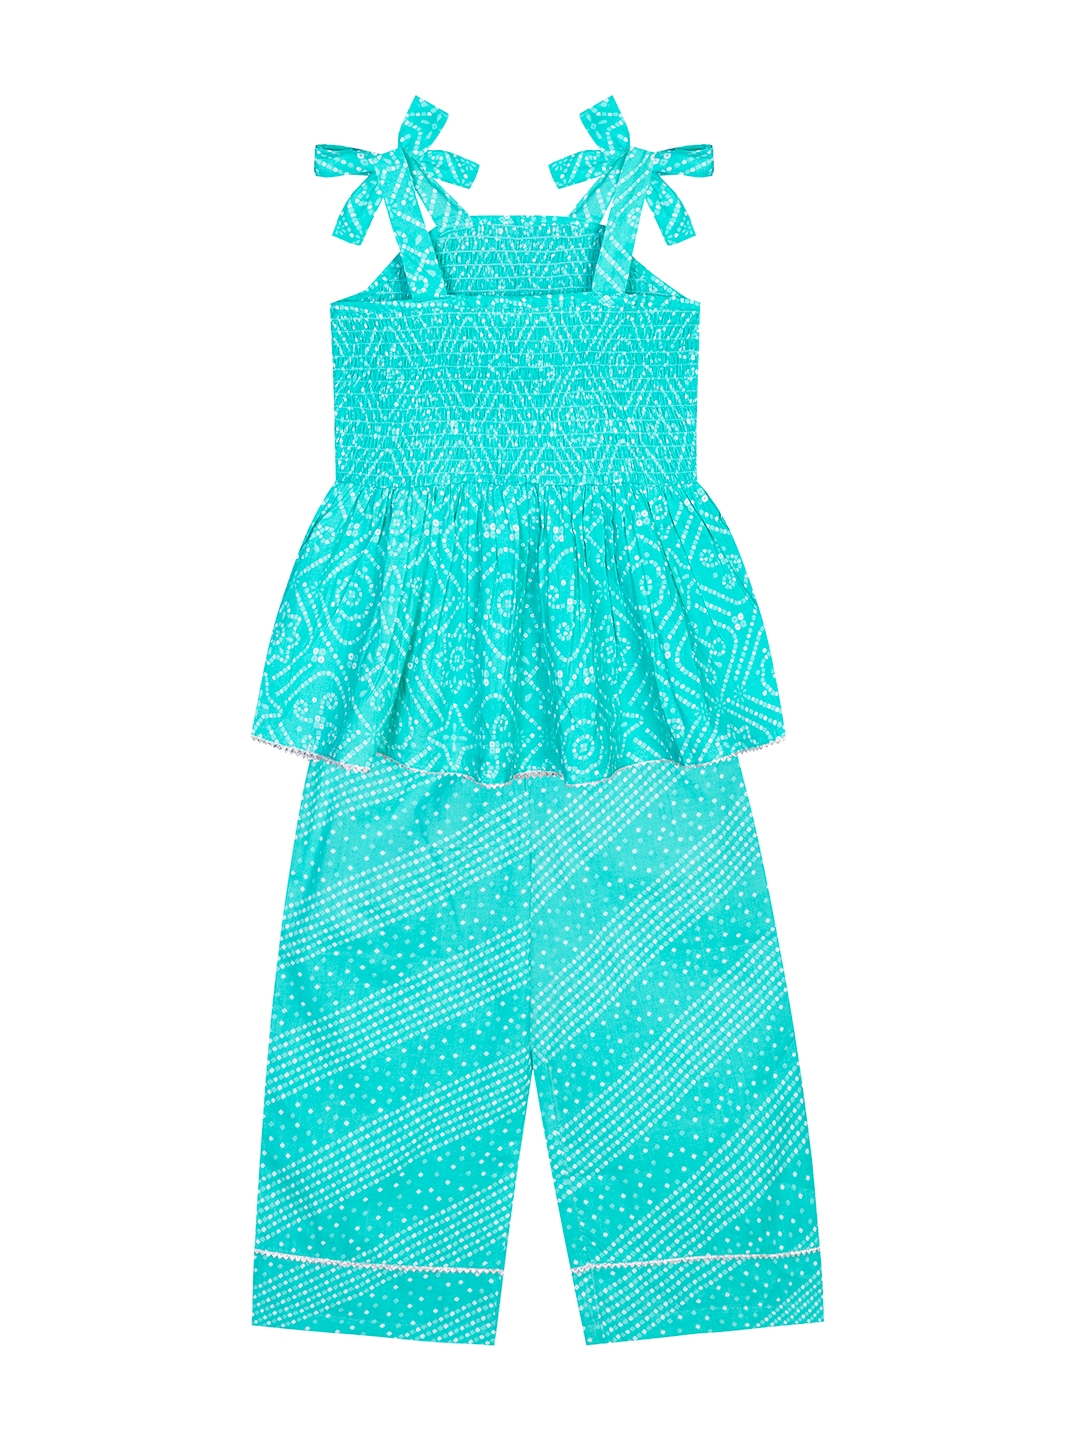 Budding Bees | Budding Bees Infants Cotton Top-Pajama Set with Matching Hairband-Green 6